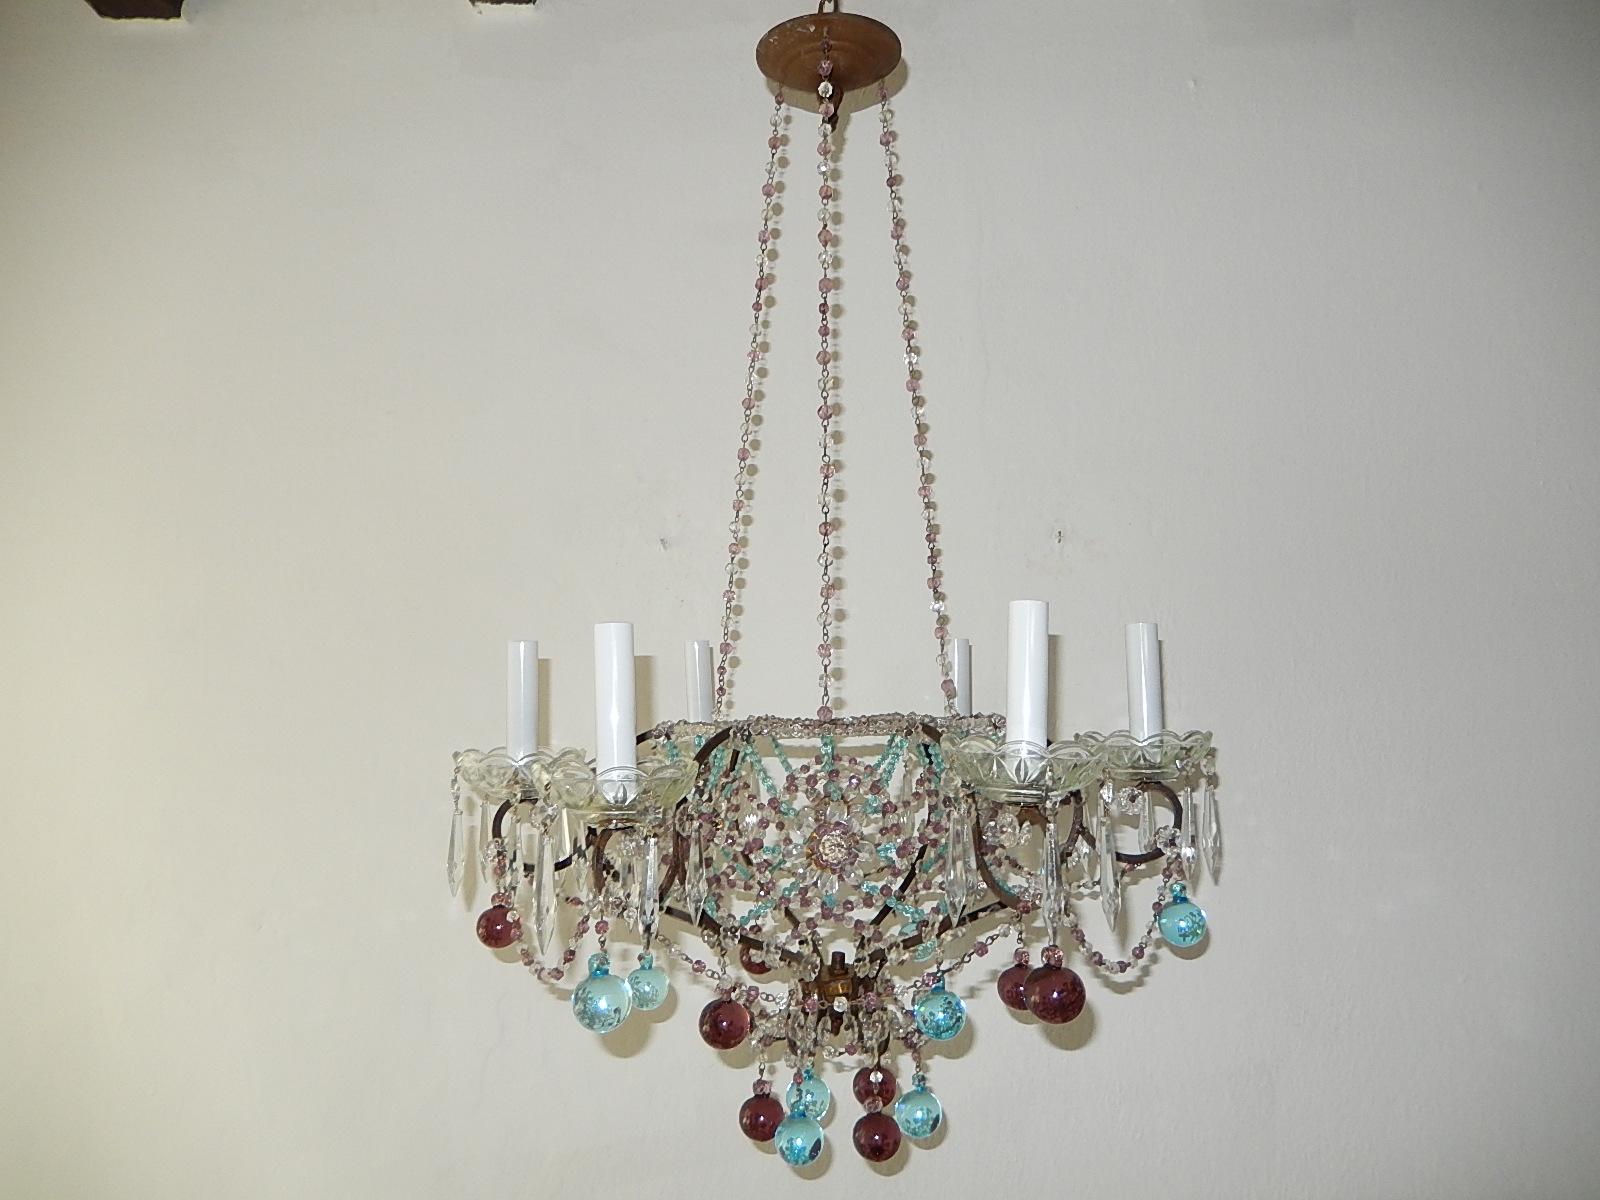 Will be newly rewired with certified US UL sockets for the Usa and appropriate sockets for all other countries and ready to hang.  An absolutely stunning chandelier. Housing 6-light, sitting in crystal bobeches, dripping with vintage crystal prisms.